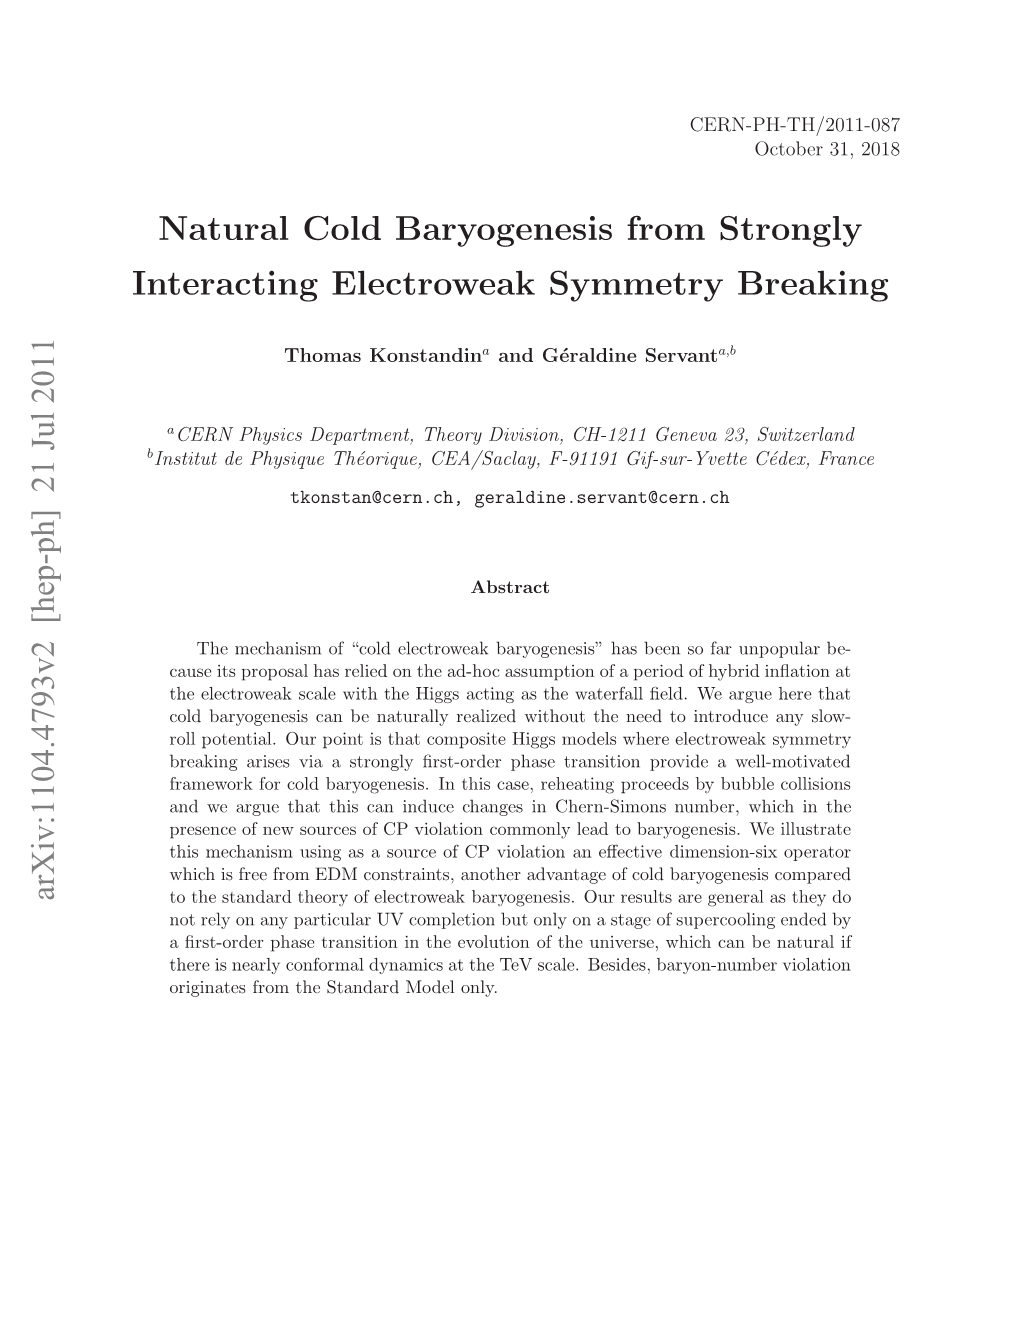 Natural Cold Baryogenesis from Strongly Interacting Electroweak